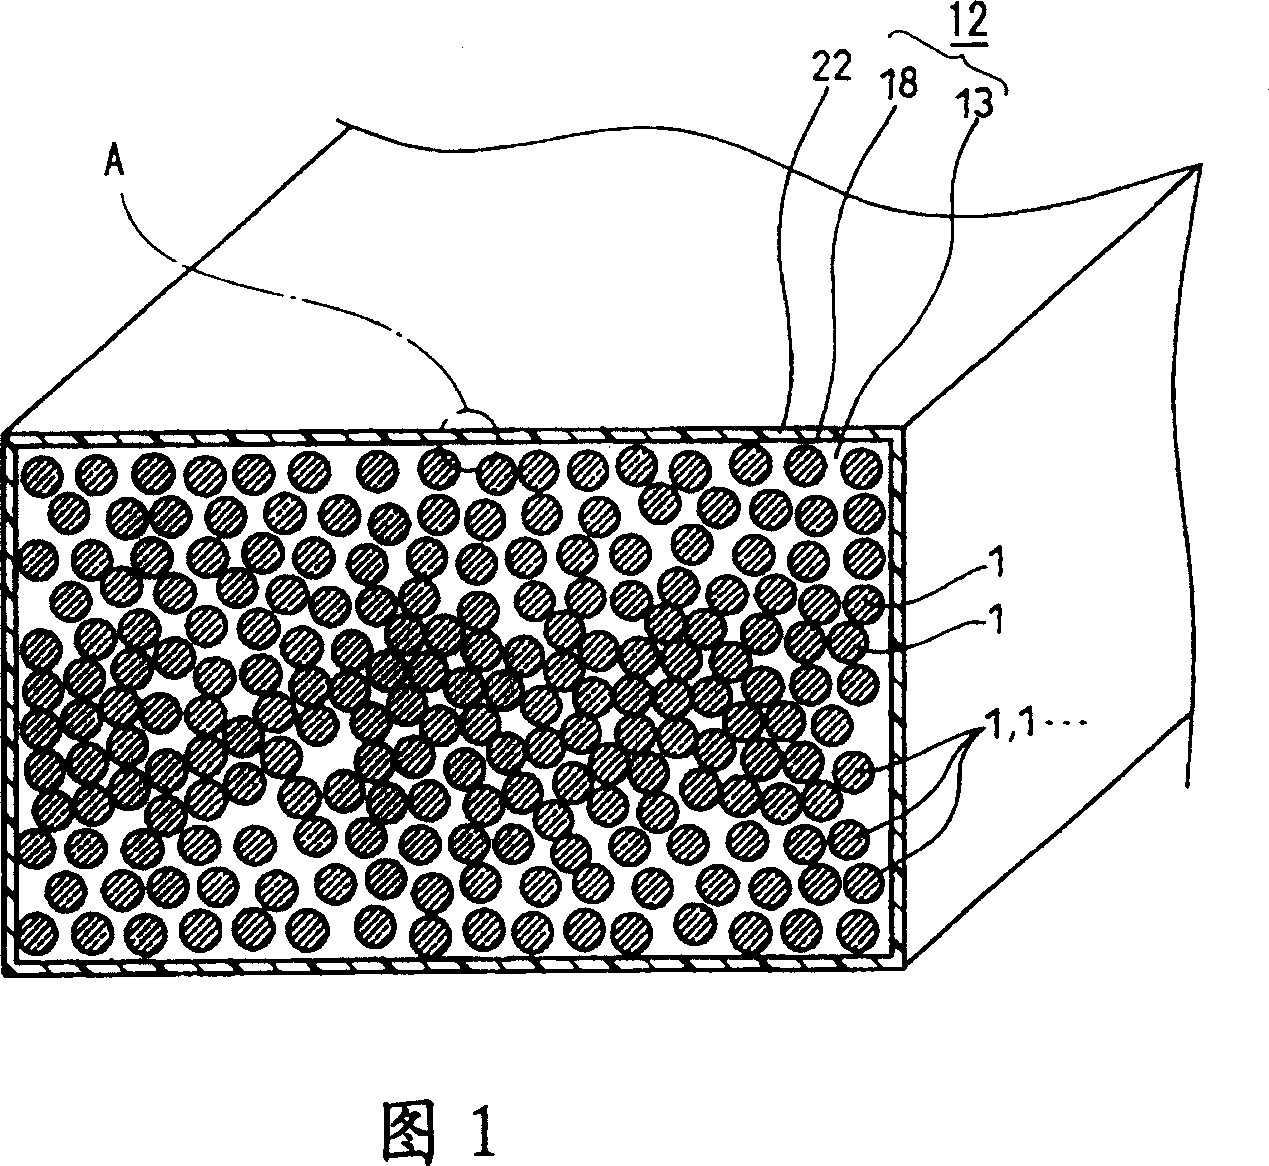 Synthetic crosstie and manufacturing method for the same